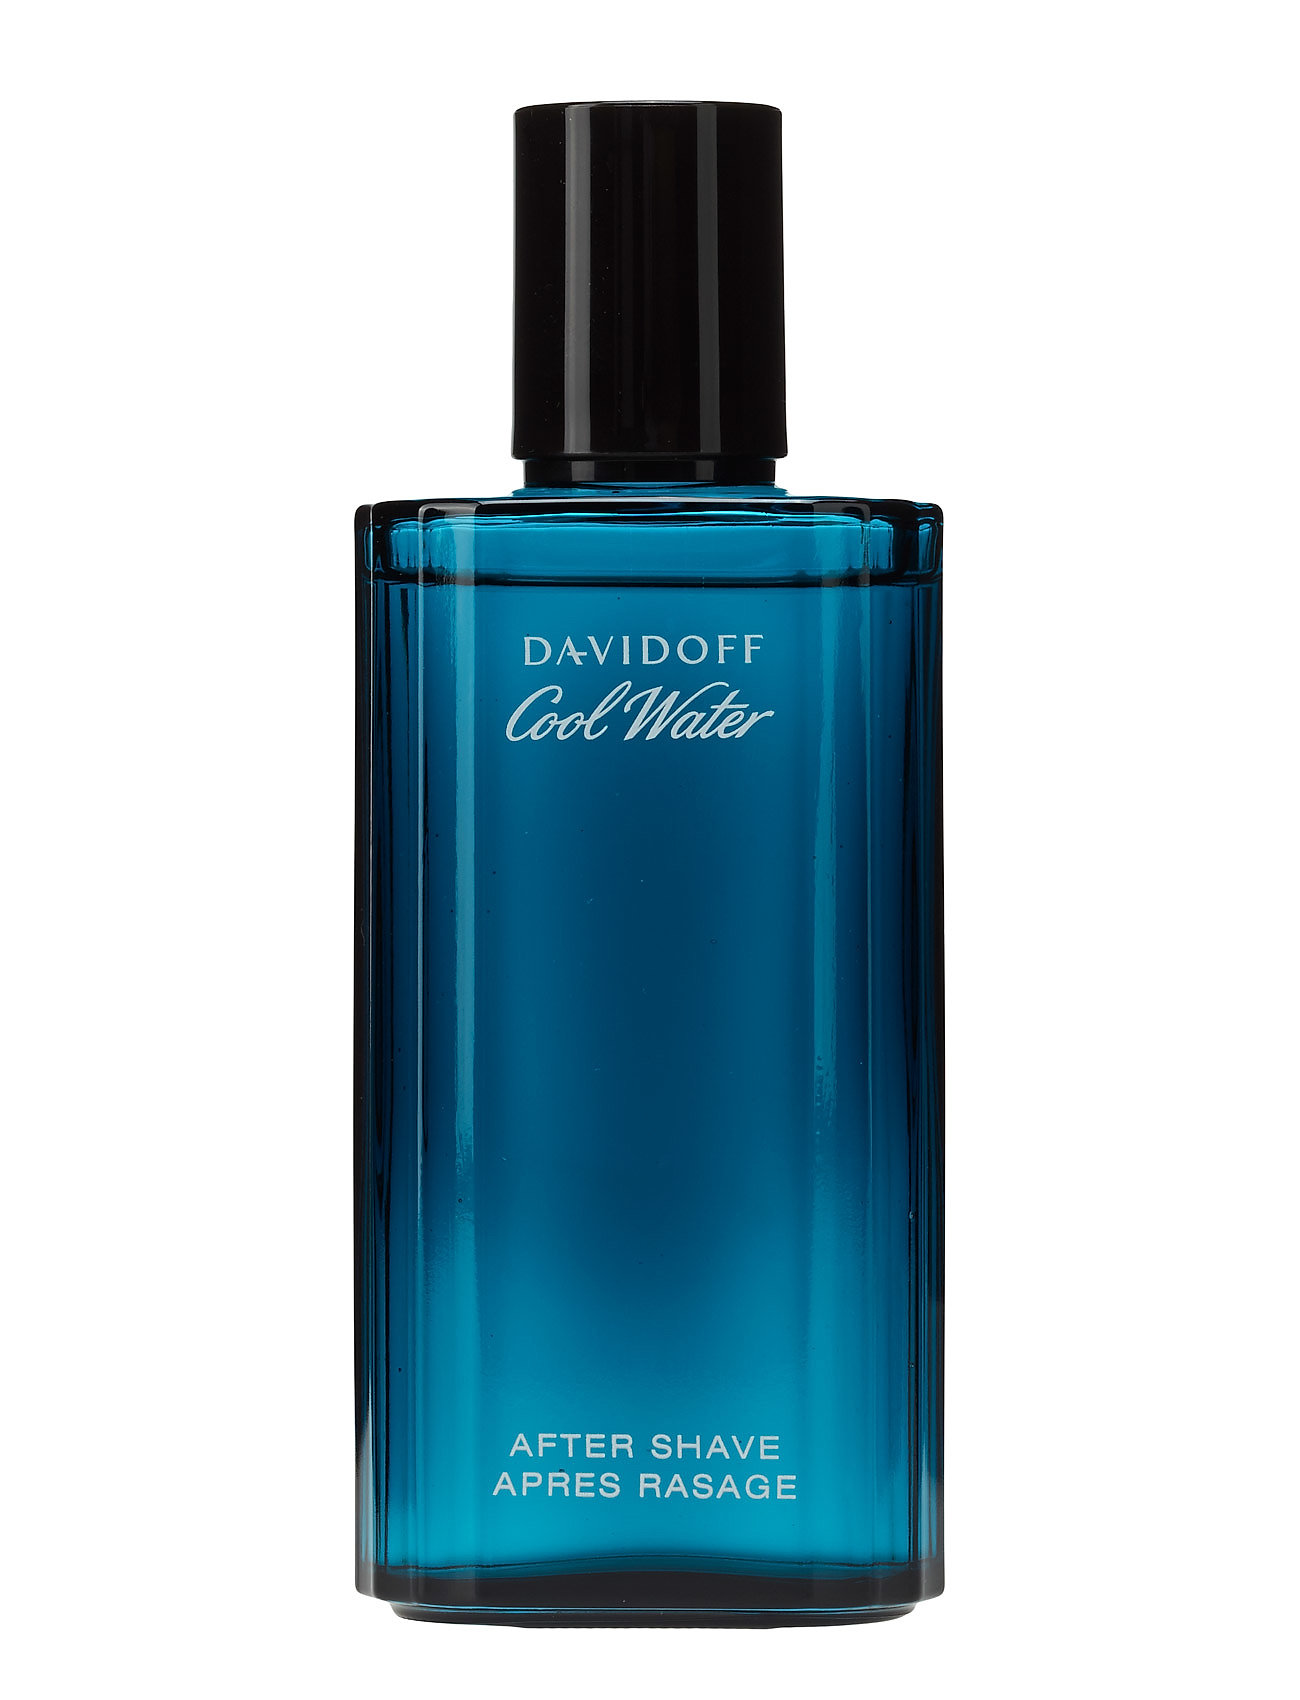 Cool Water Man After Shavesplash Beauty Men Shaving Products After Shave Nude Davidoff